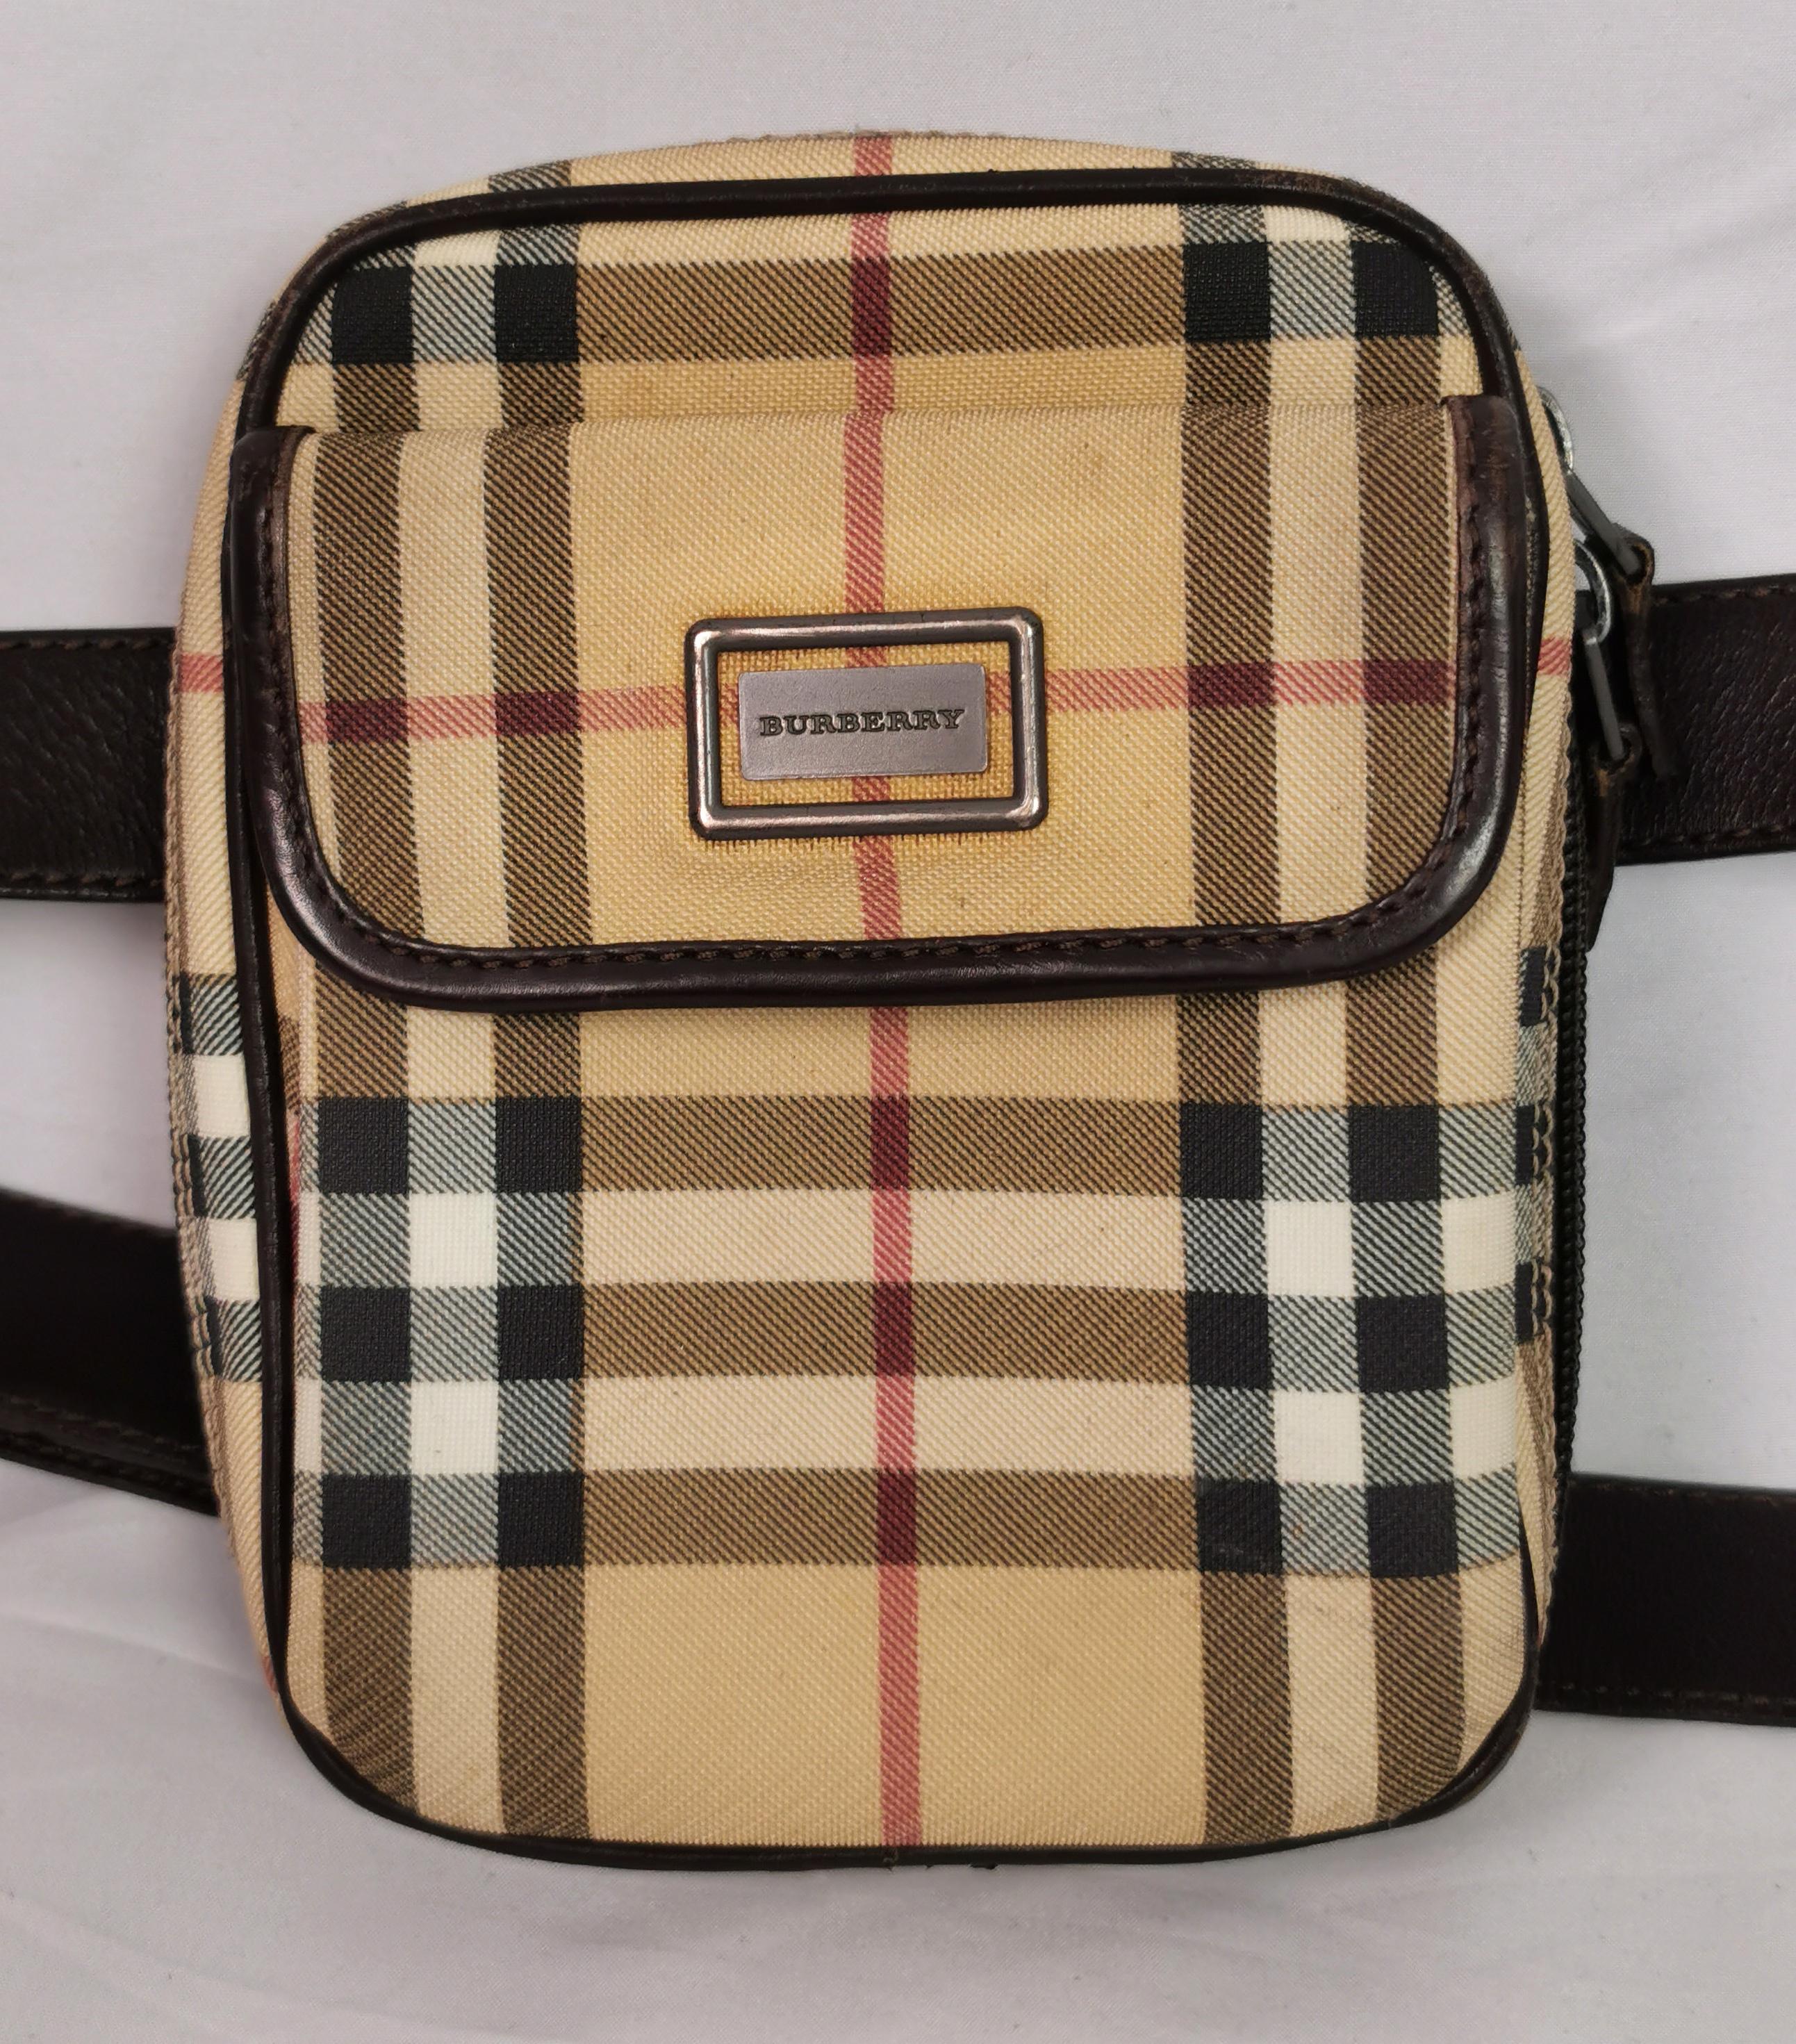 A stylish vintage Burberry belt bag, can be worn around the waist or Crossbody.

It is a small camera shaped bag with a front flap pocket that fastens with a snap fastener.

This is the perfect bag for travel or on the go.

Classic Nova check in a